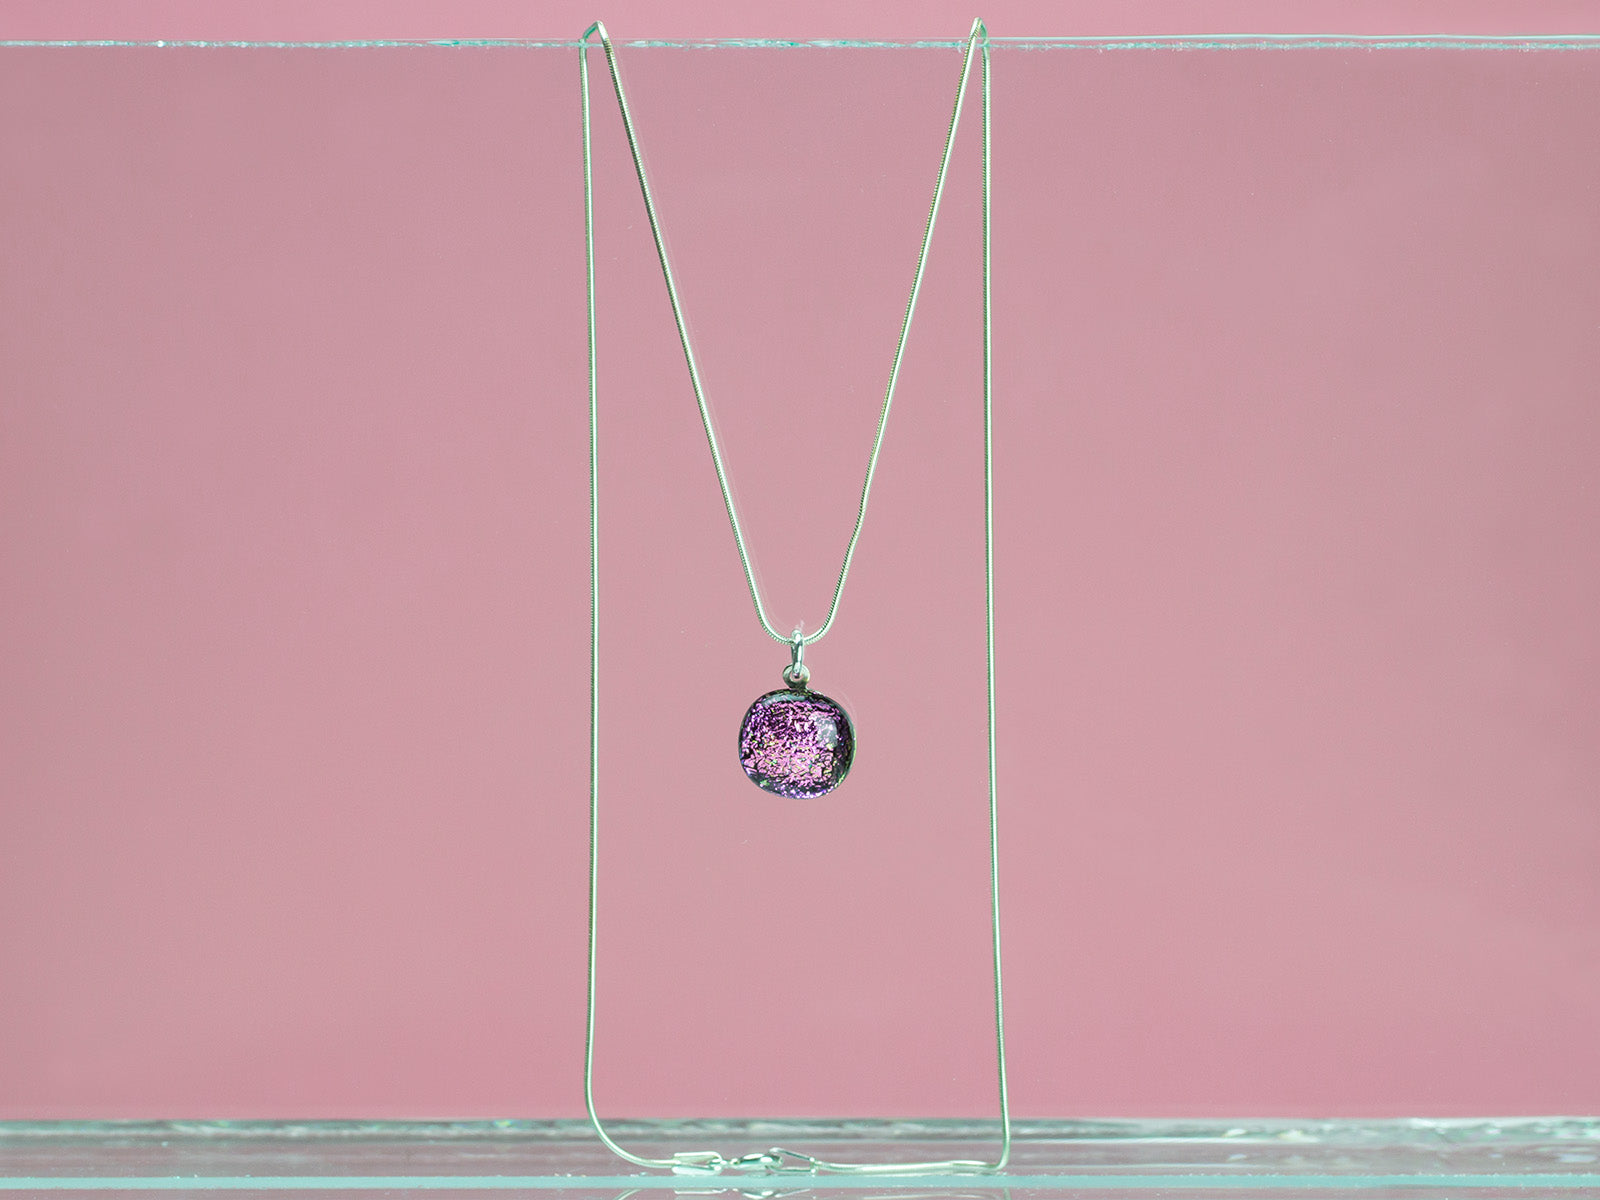 Pink Small Gem Pendant Necklace